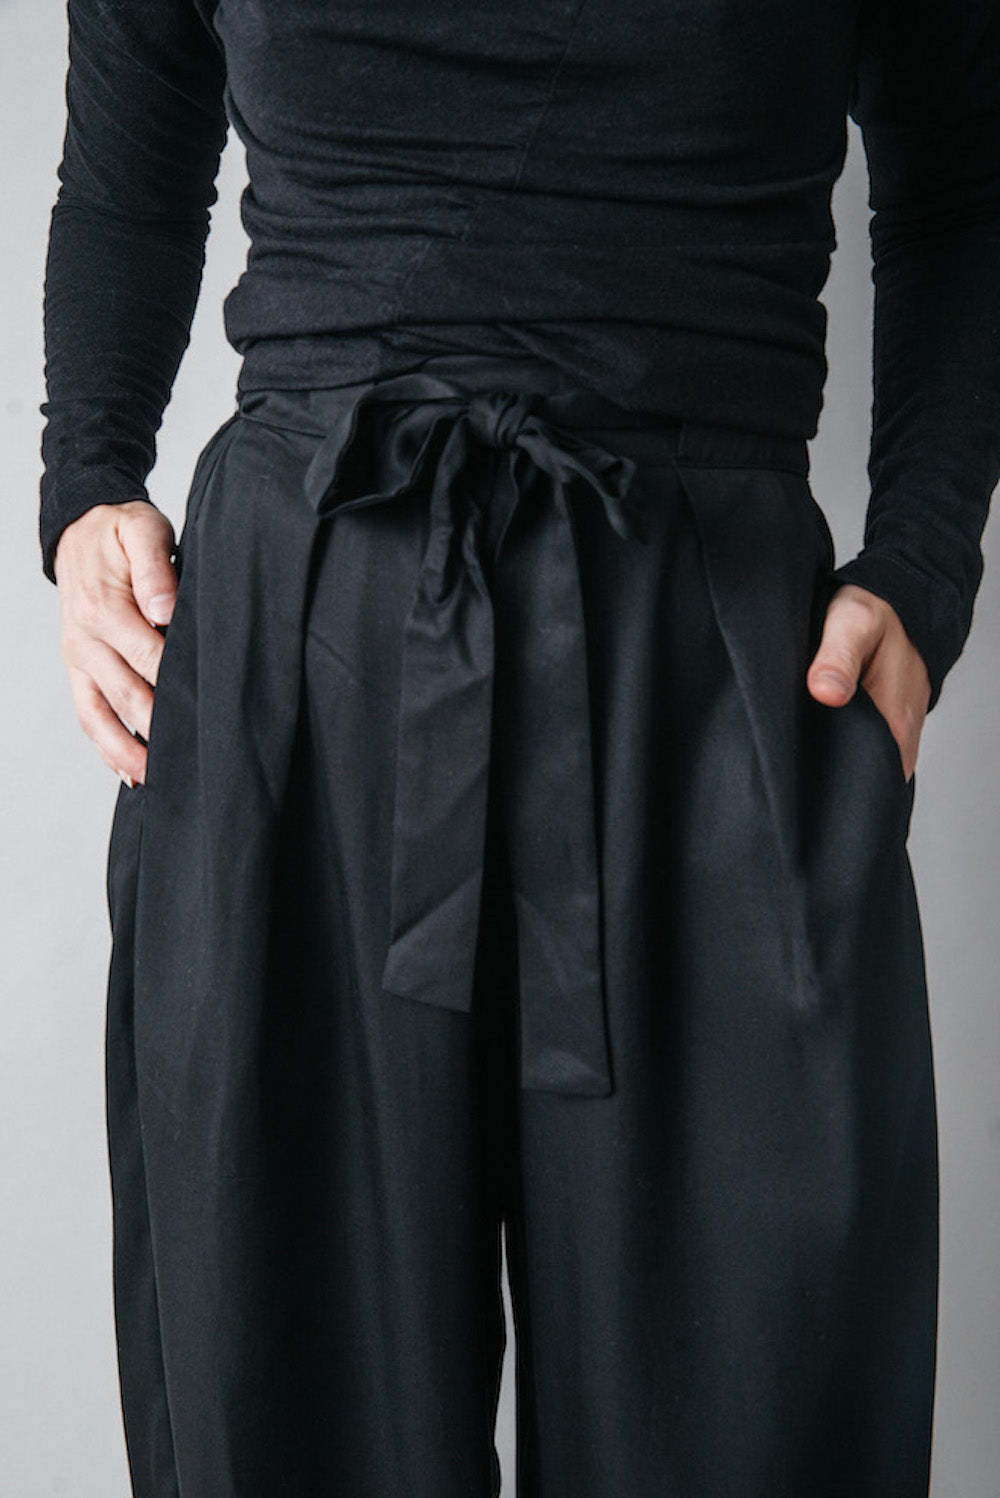 Black Flared Trousers by Cossac